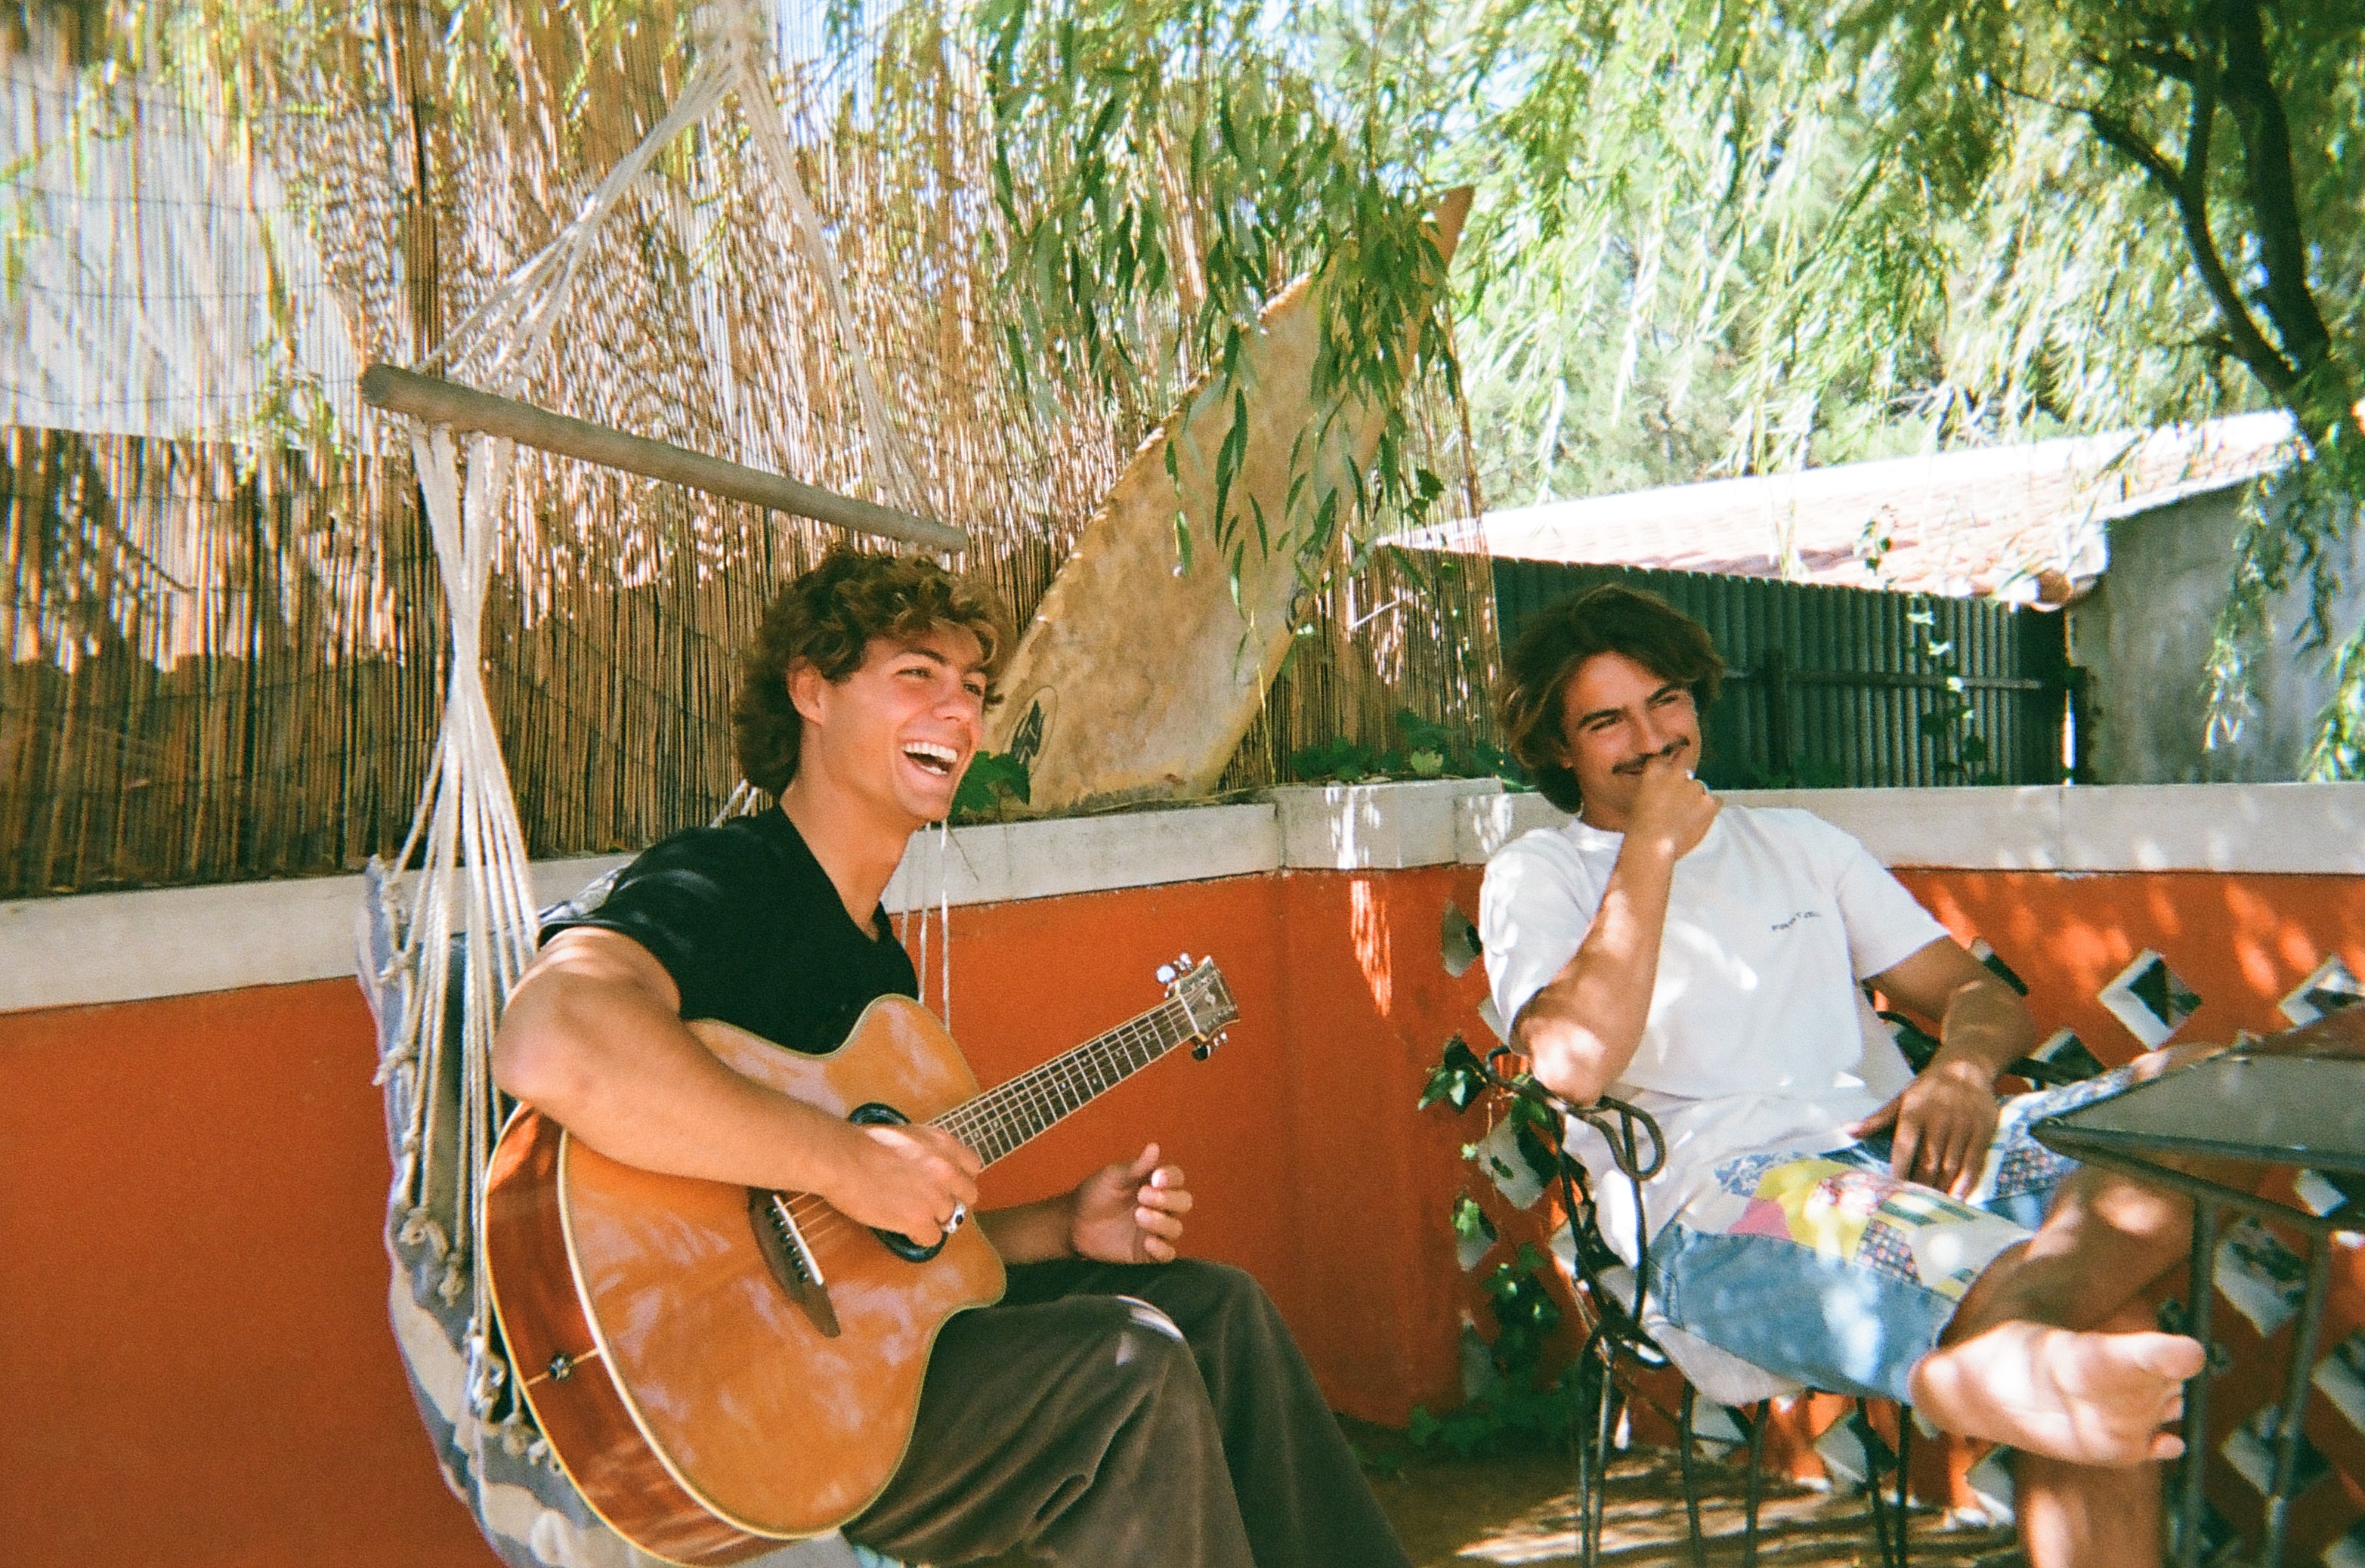 Paco and Valerio at their home in Portugal for "By Any Means" by Alaïa Alpine Alternative, October 2022